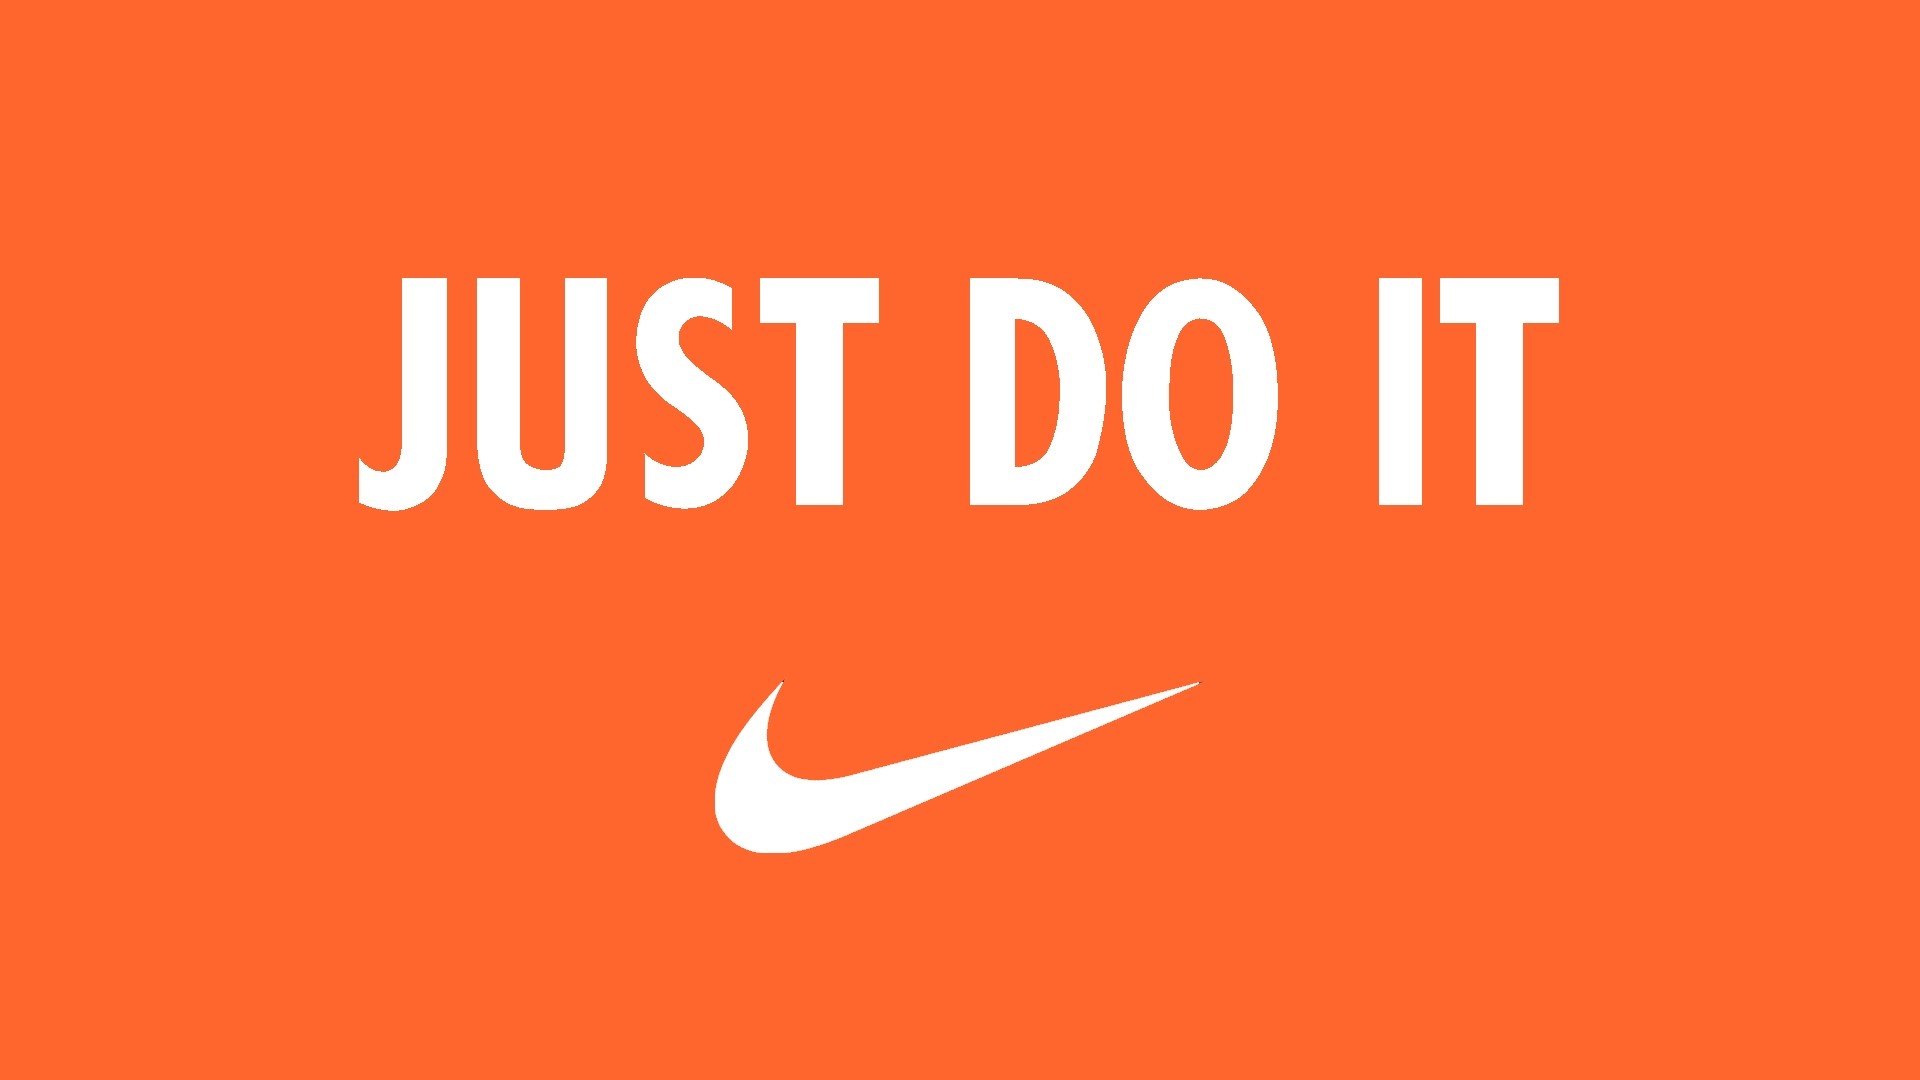 1920x1080  Awesome Nike Wallpaper Just Do It | Soccer Wallpaper Â· Download Â·  just ...